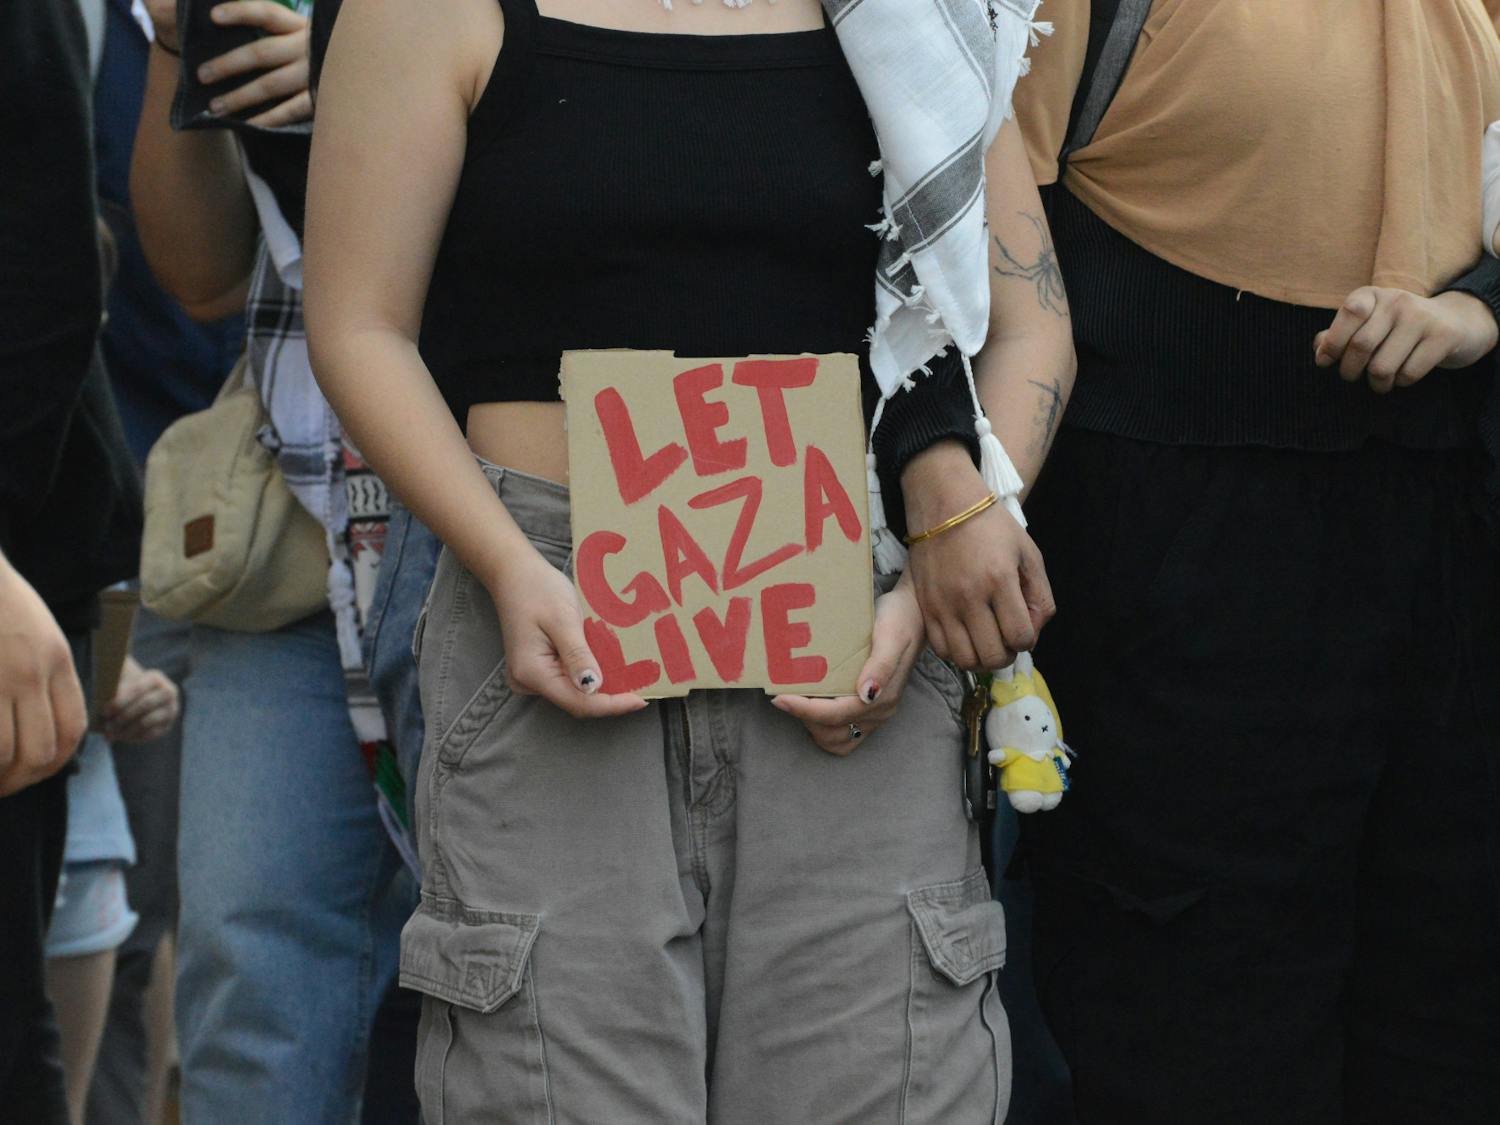 A protestor holds a "let Gaza live" sign at Friday's protest.